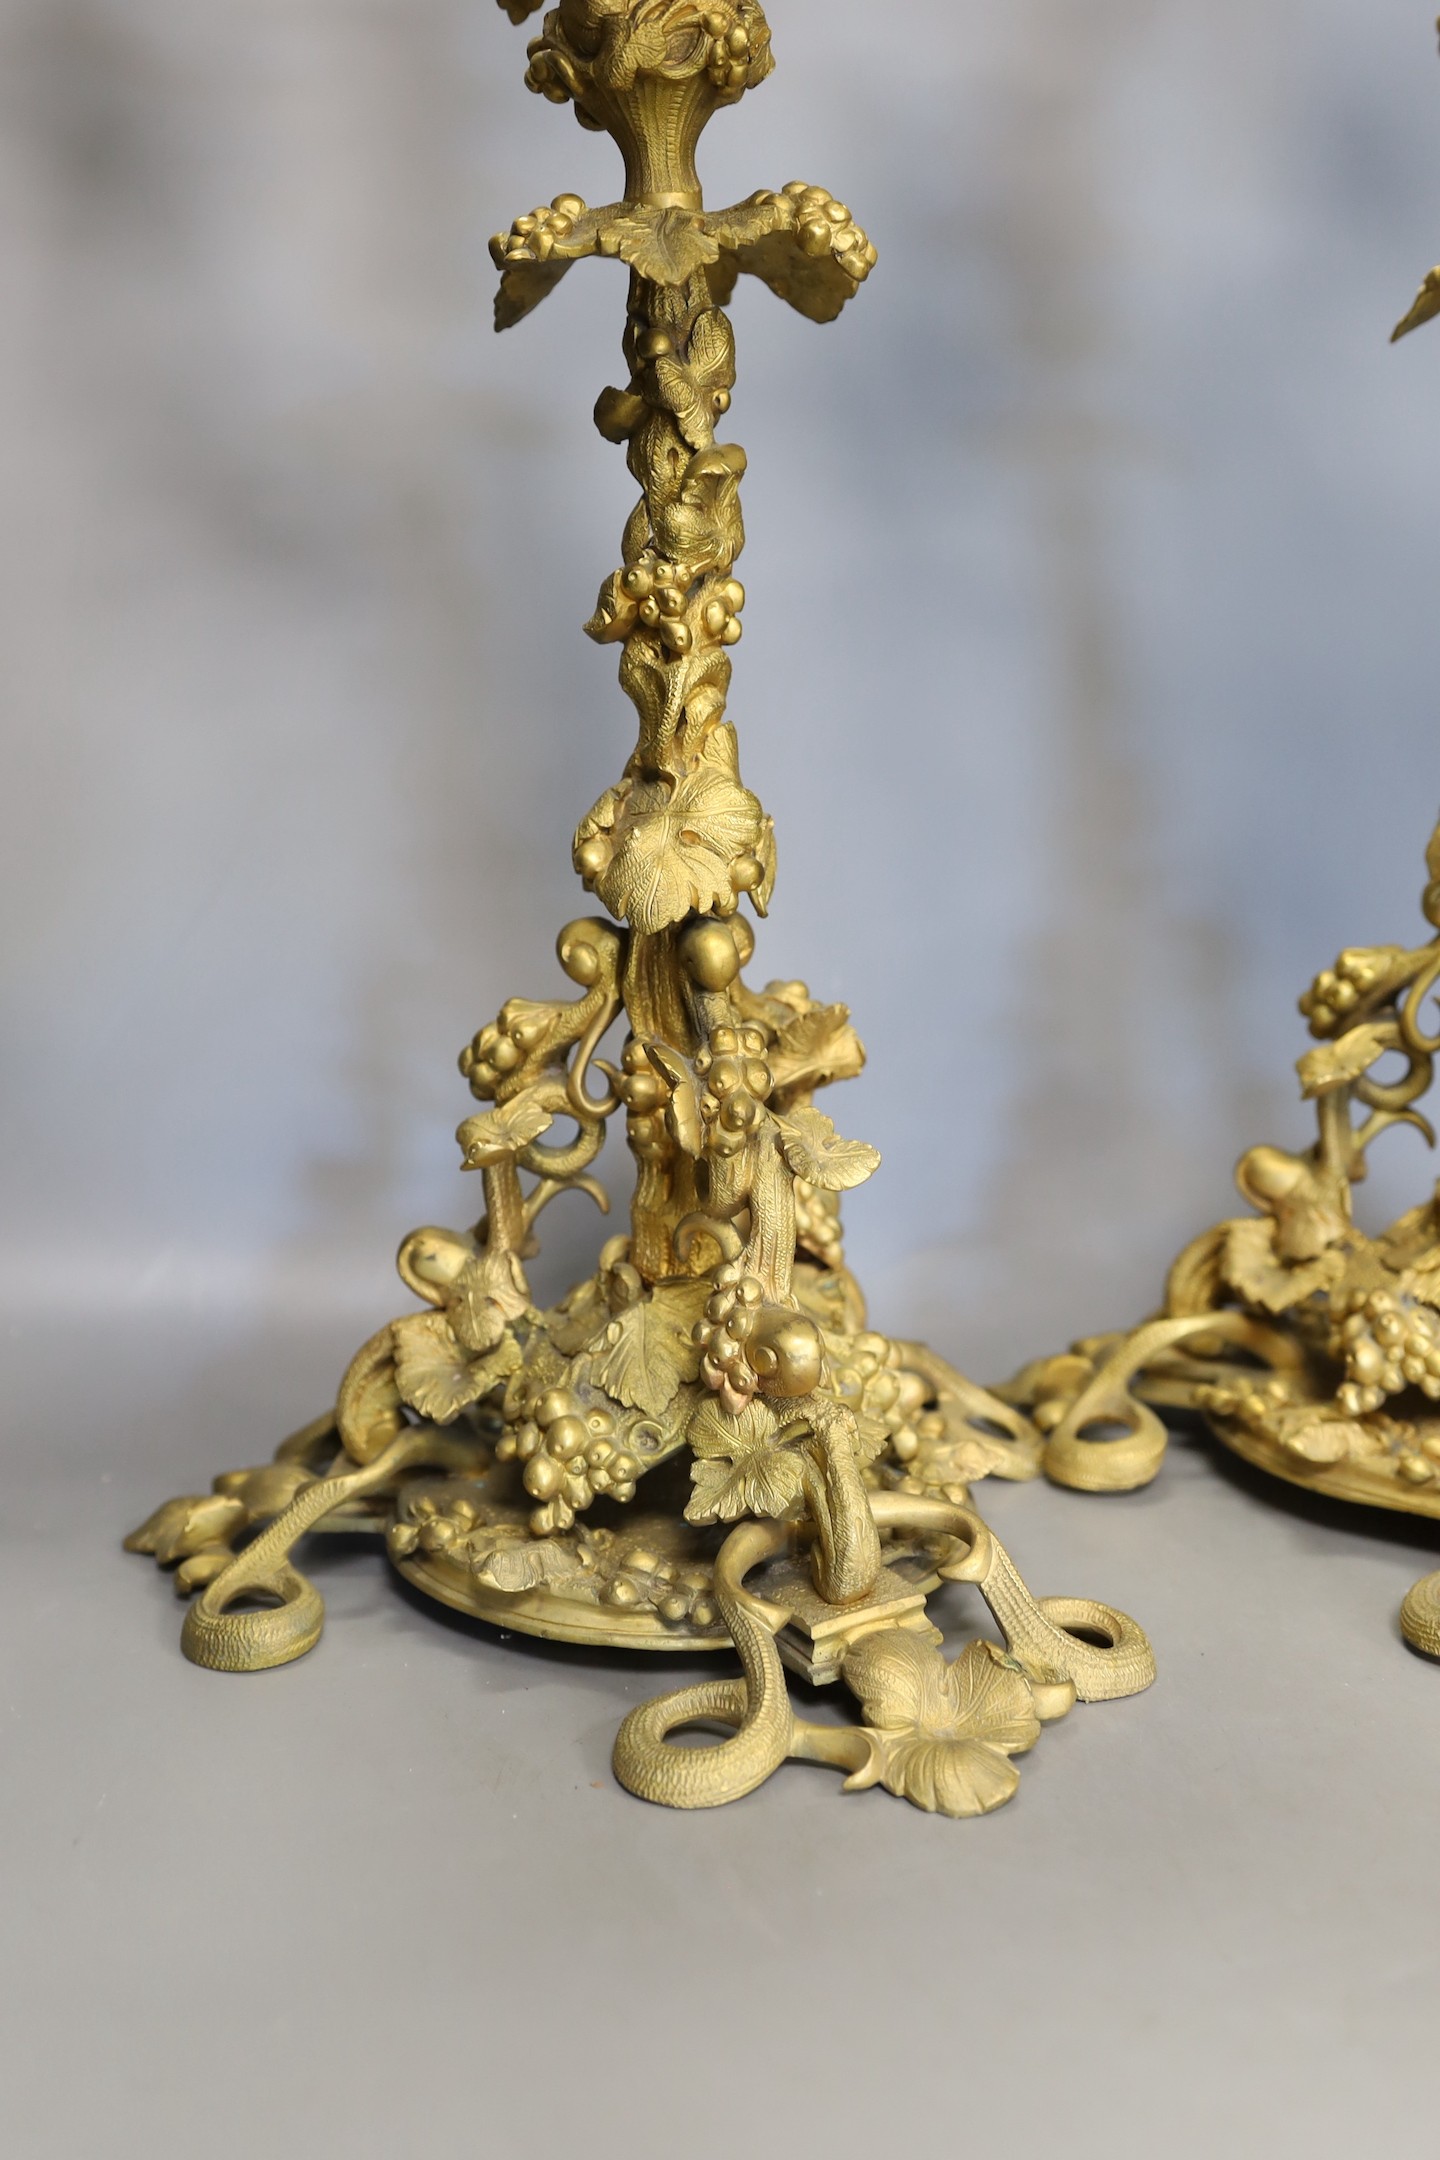 A pair of Victorian ormolu 4-light candelabra with vineous stems - 56cm tall